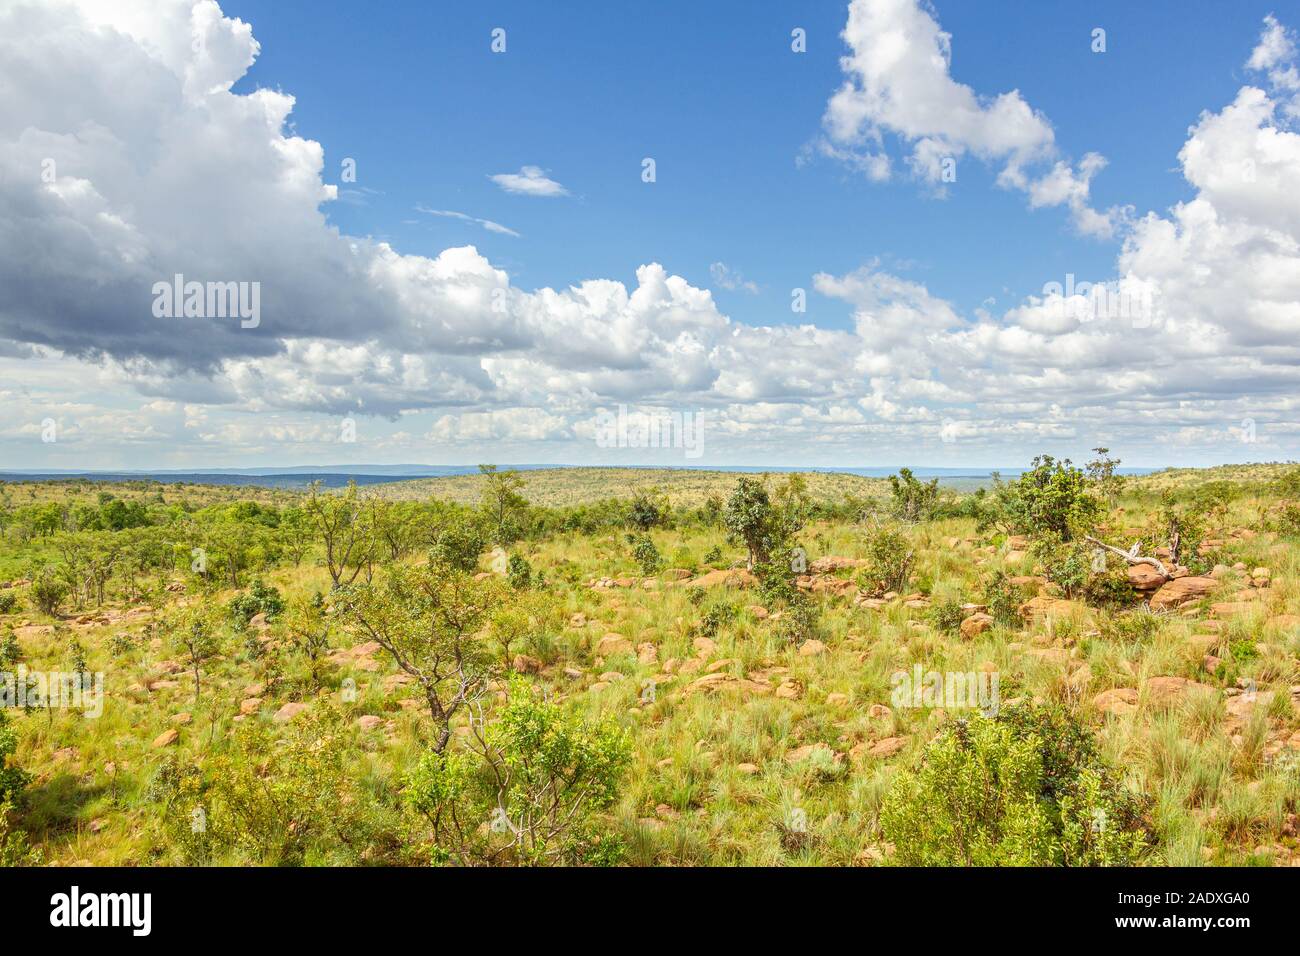 Landscape in Welgevonden Game Reserve, South Africa. Stock Photo